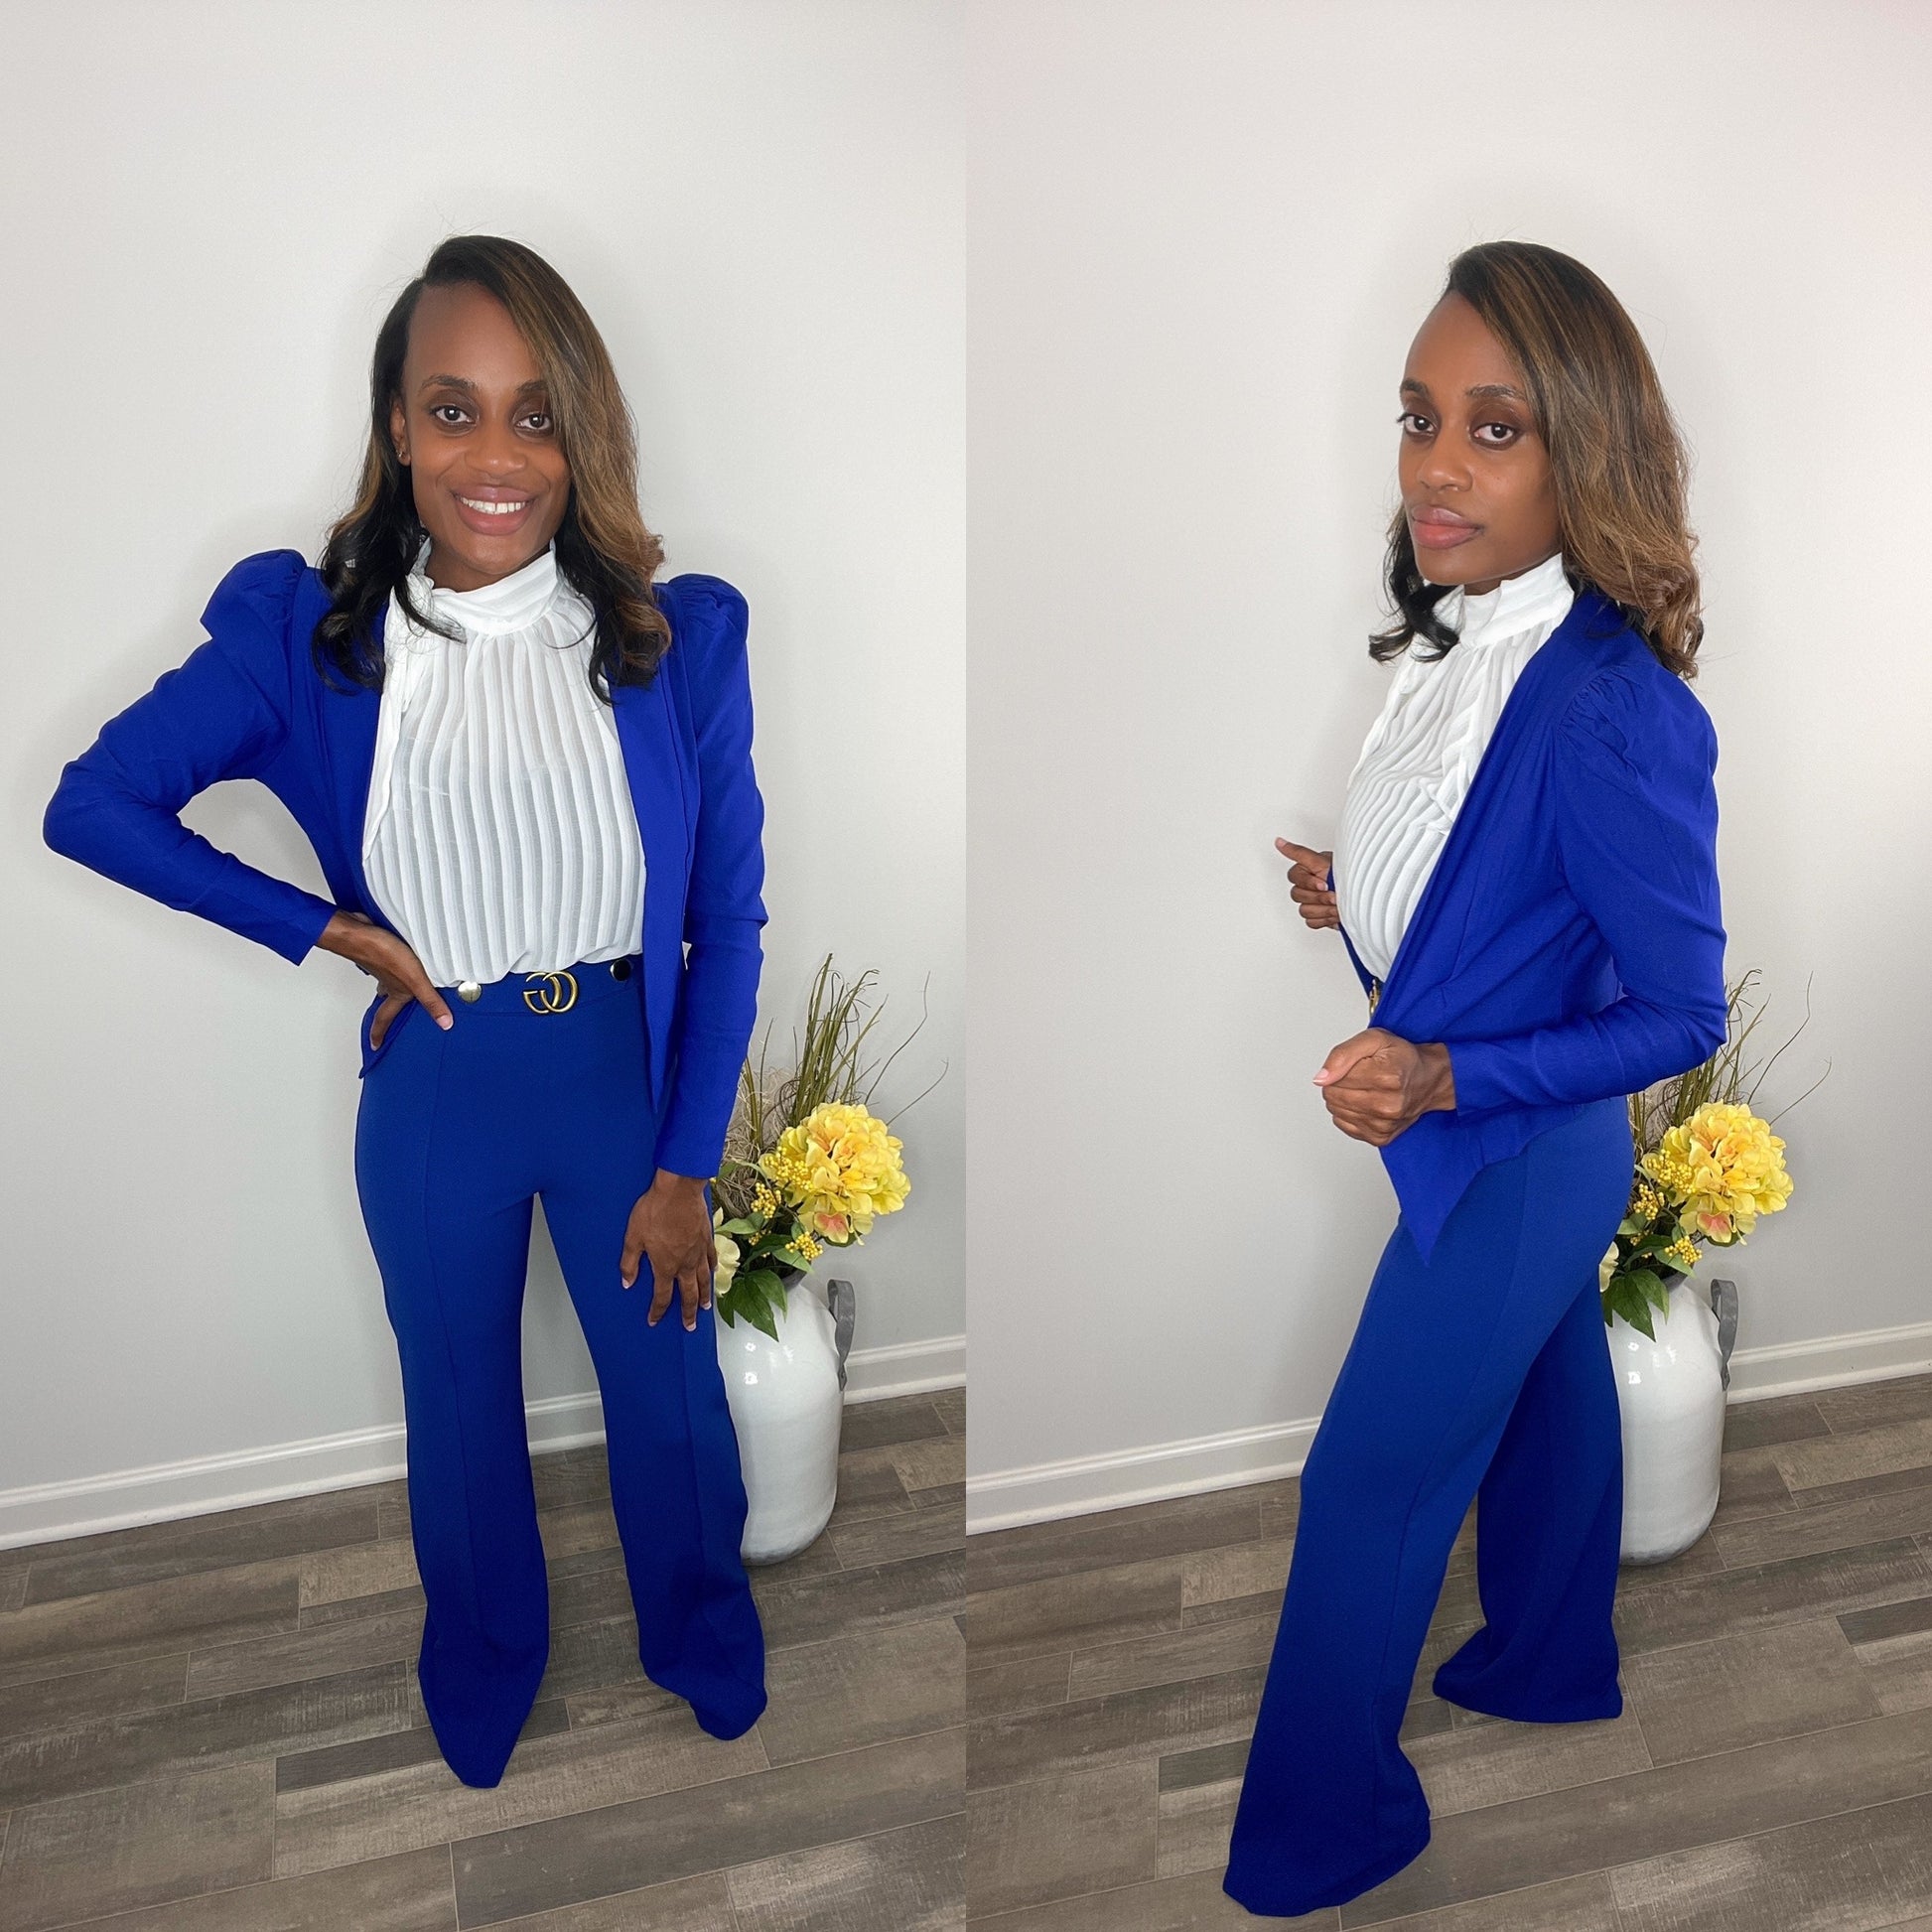 Forever Galore wearing a royal blue pant suit for work or church and Shoe Dazzle clear heels lawyer fashion Harlem on Amazon 